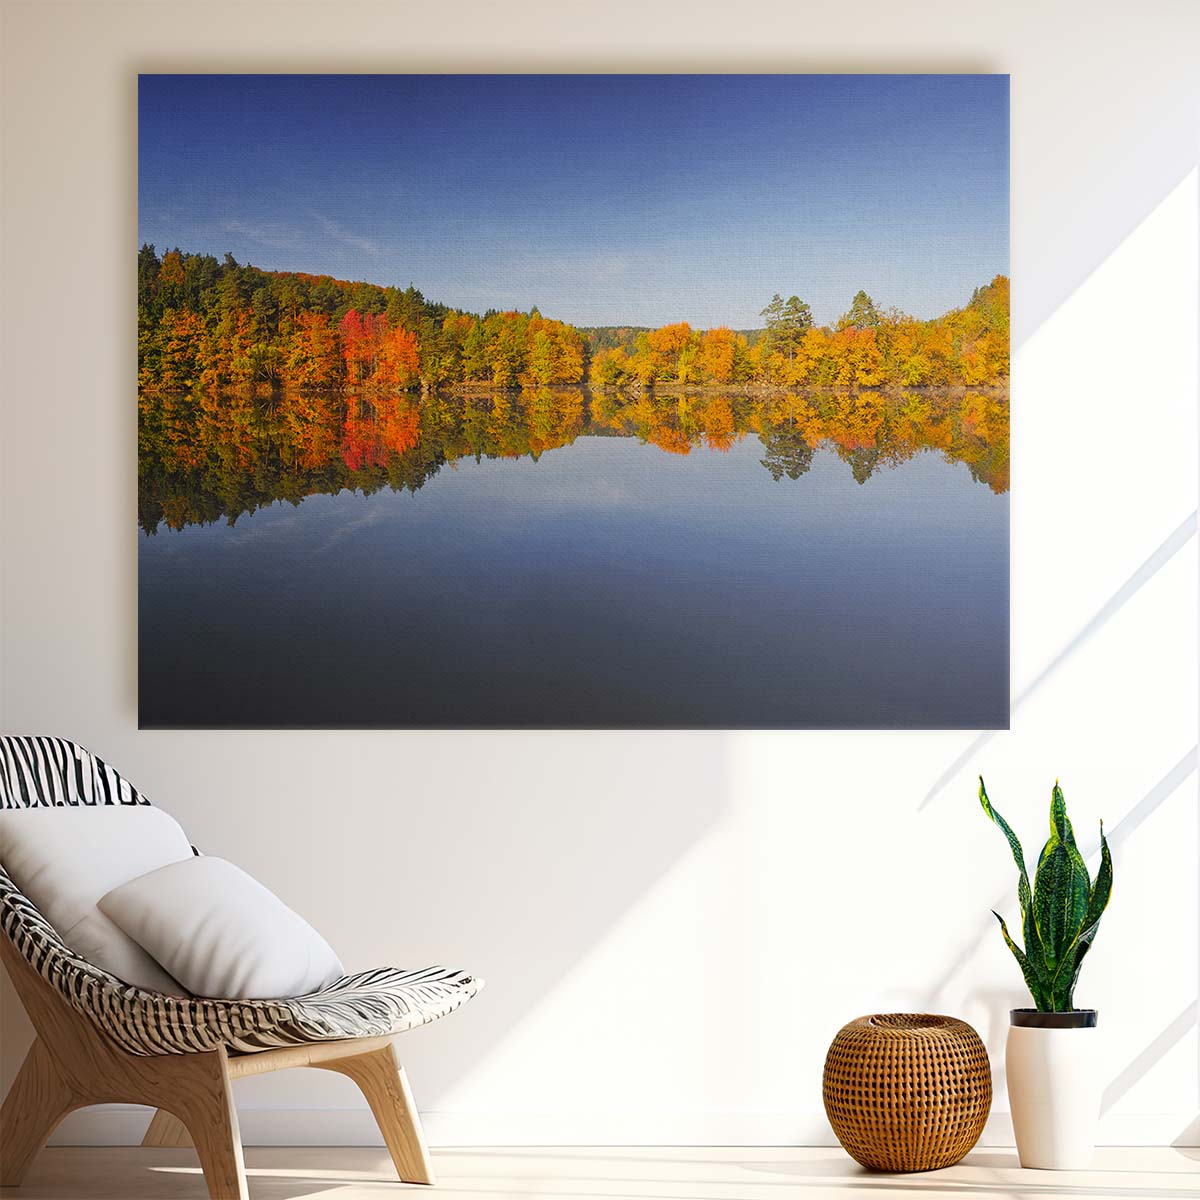 Colorful Autumn Lake & Forest Panorama Wall Art by Luxuriance Designs. Made in USA.